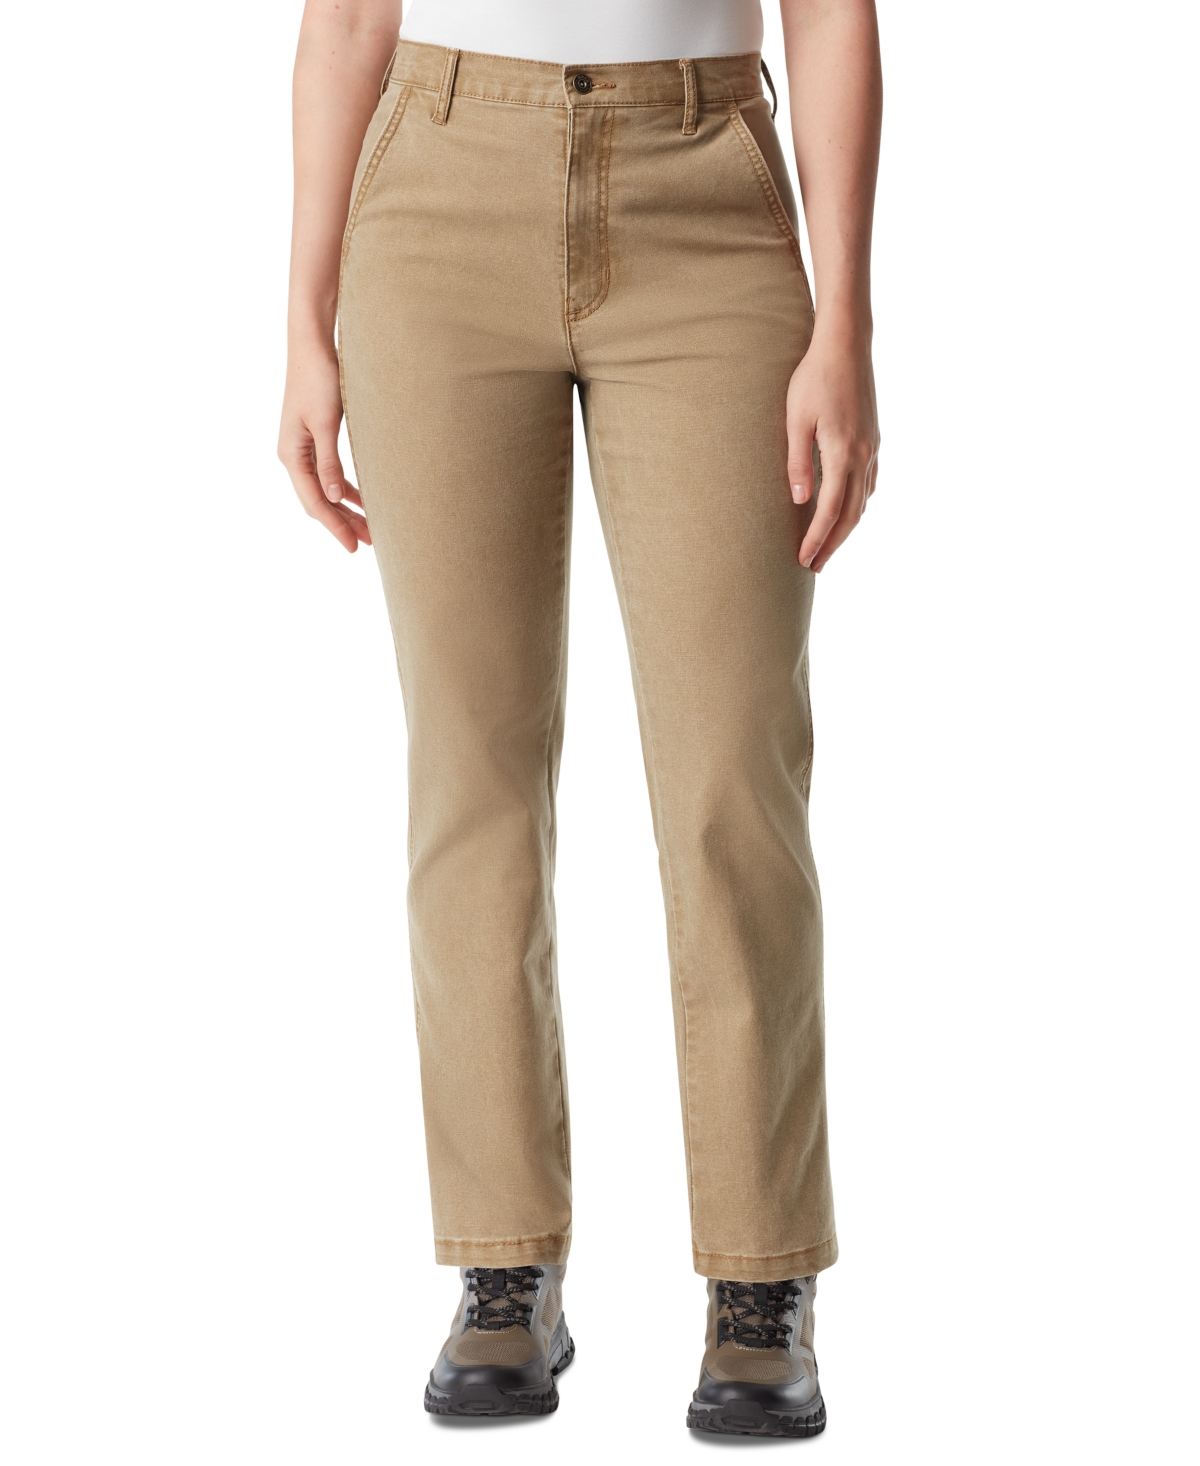 Women's High-Rise Slim-Fit Ankle Pants - FORGED IRON